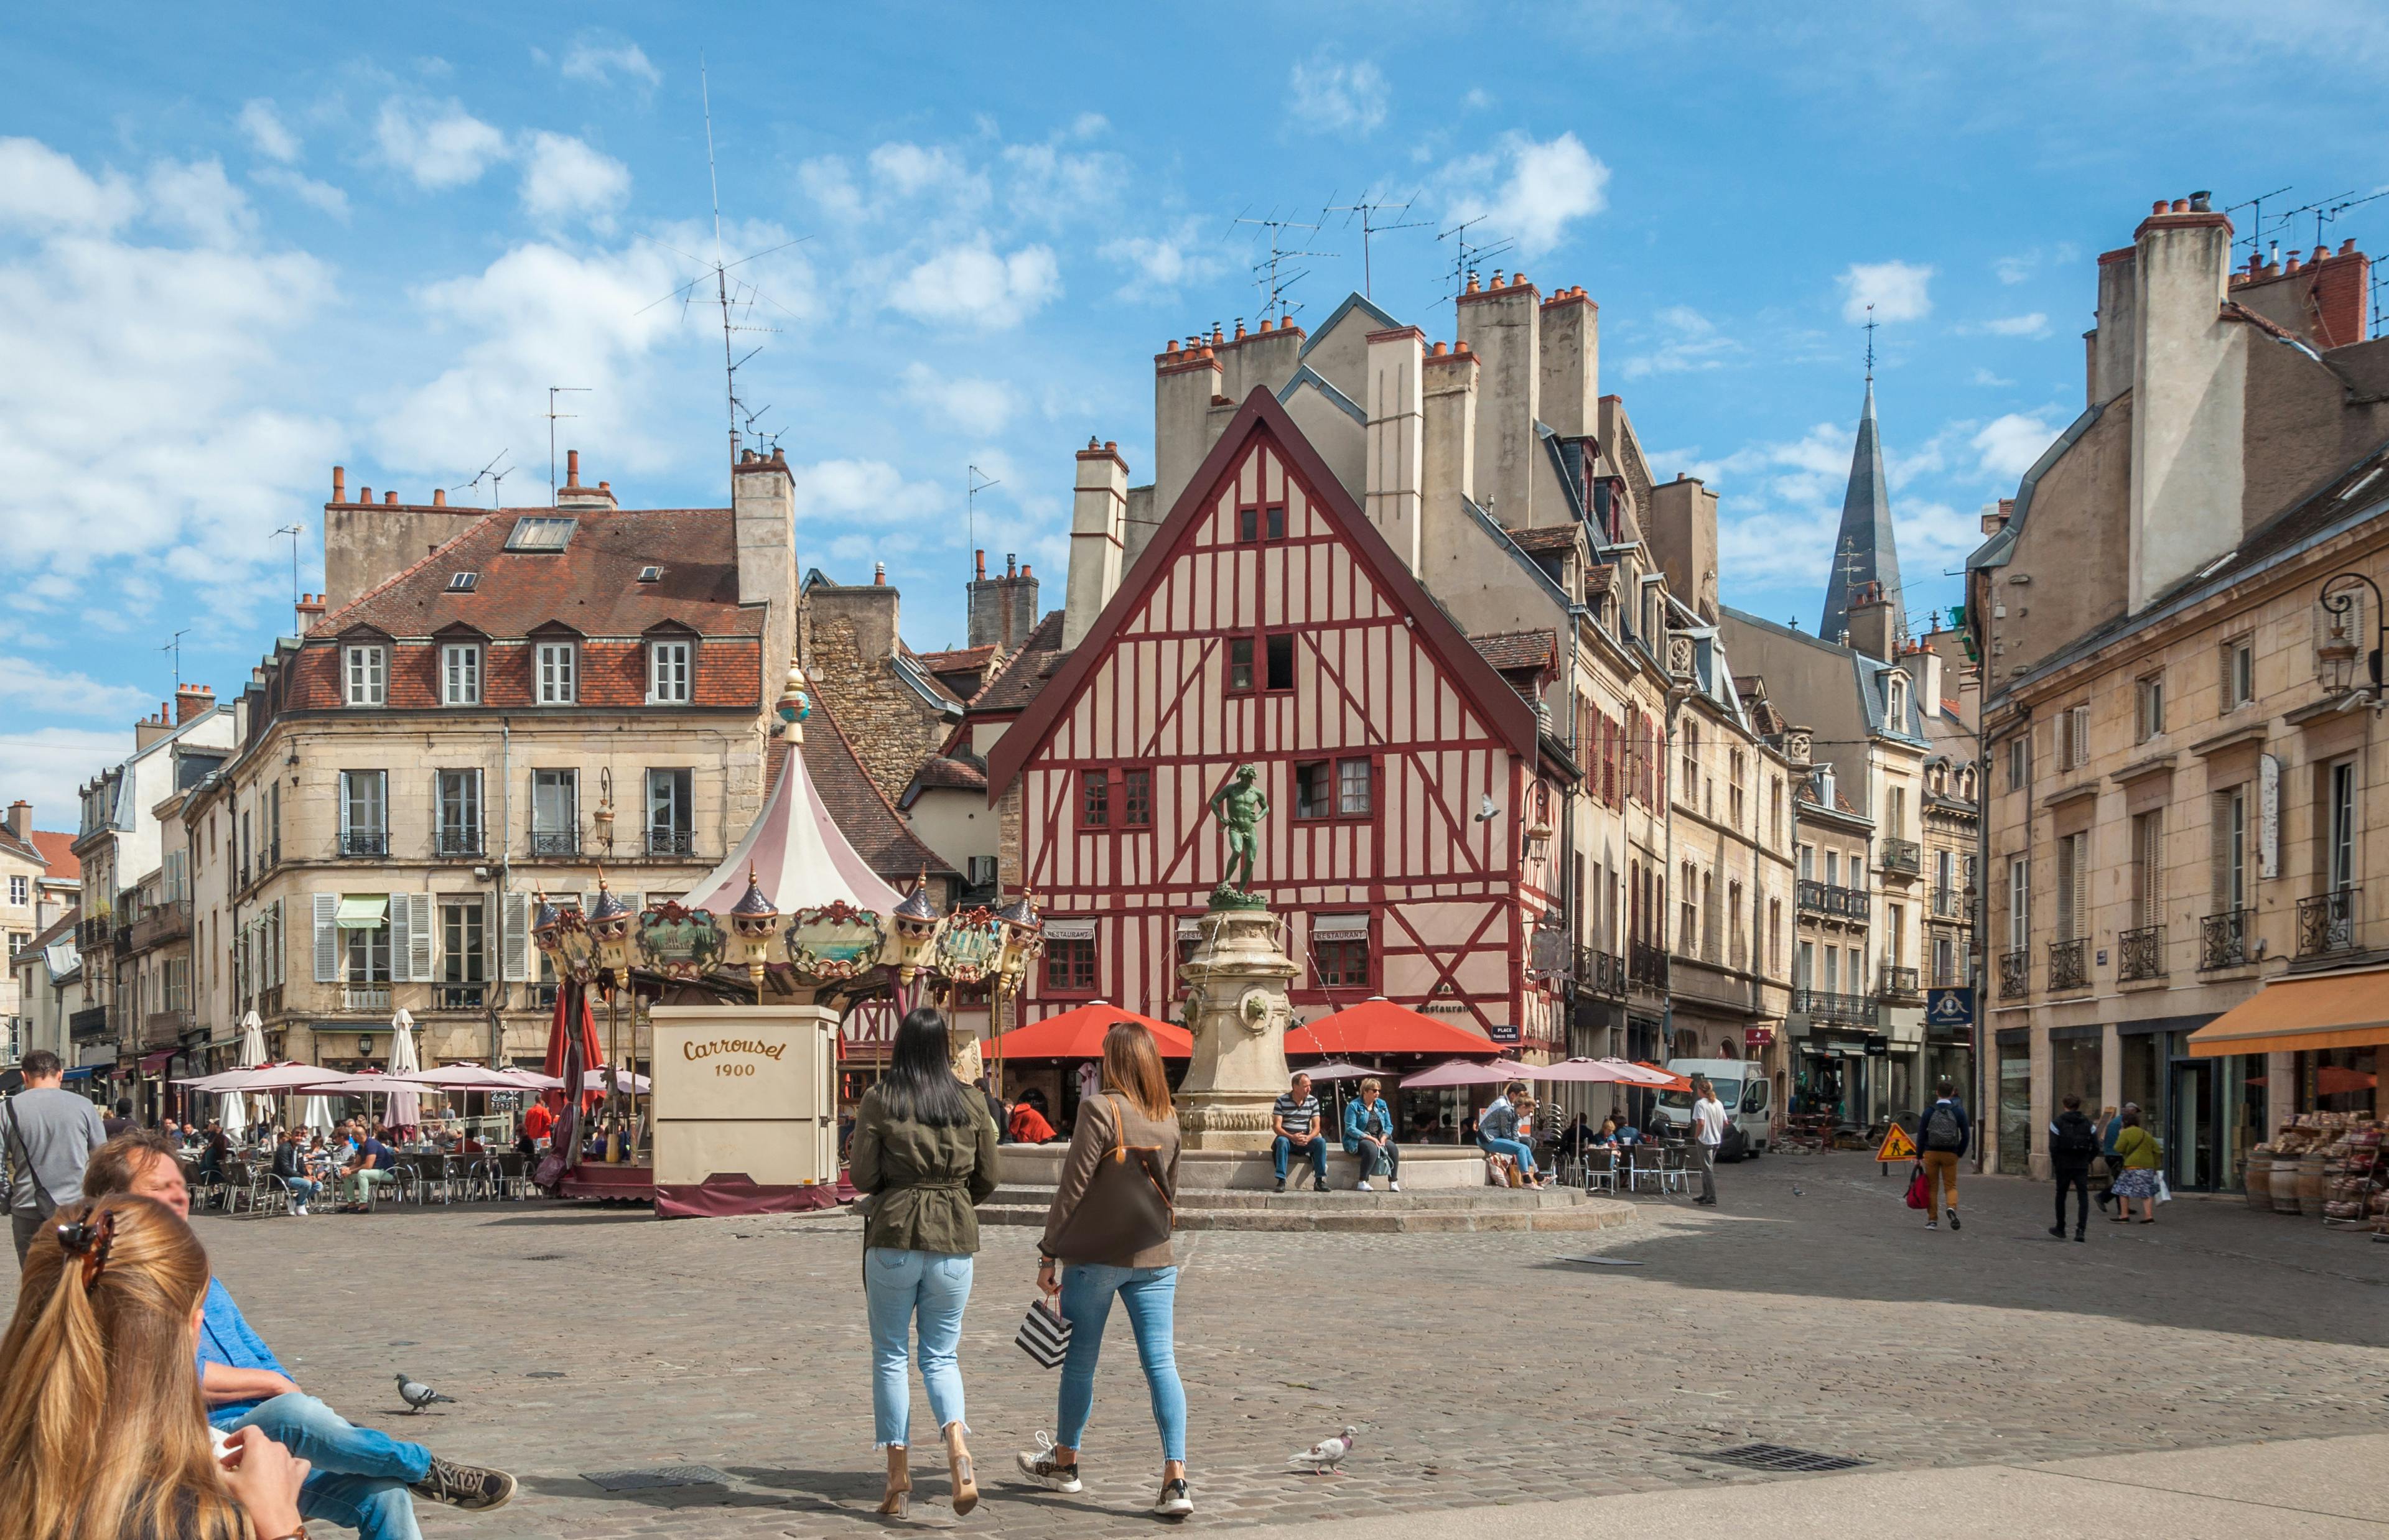 Self guided tour with interactive city game of Dijon Musement